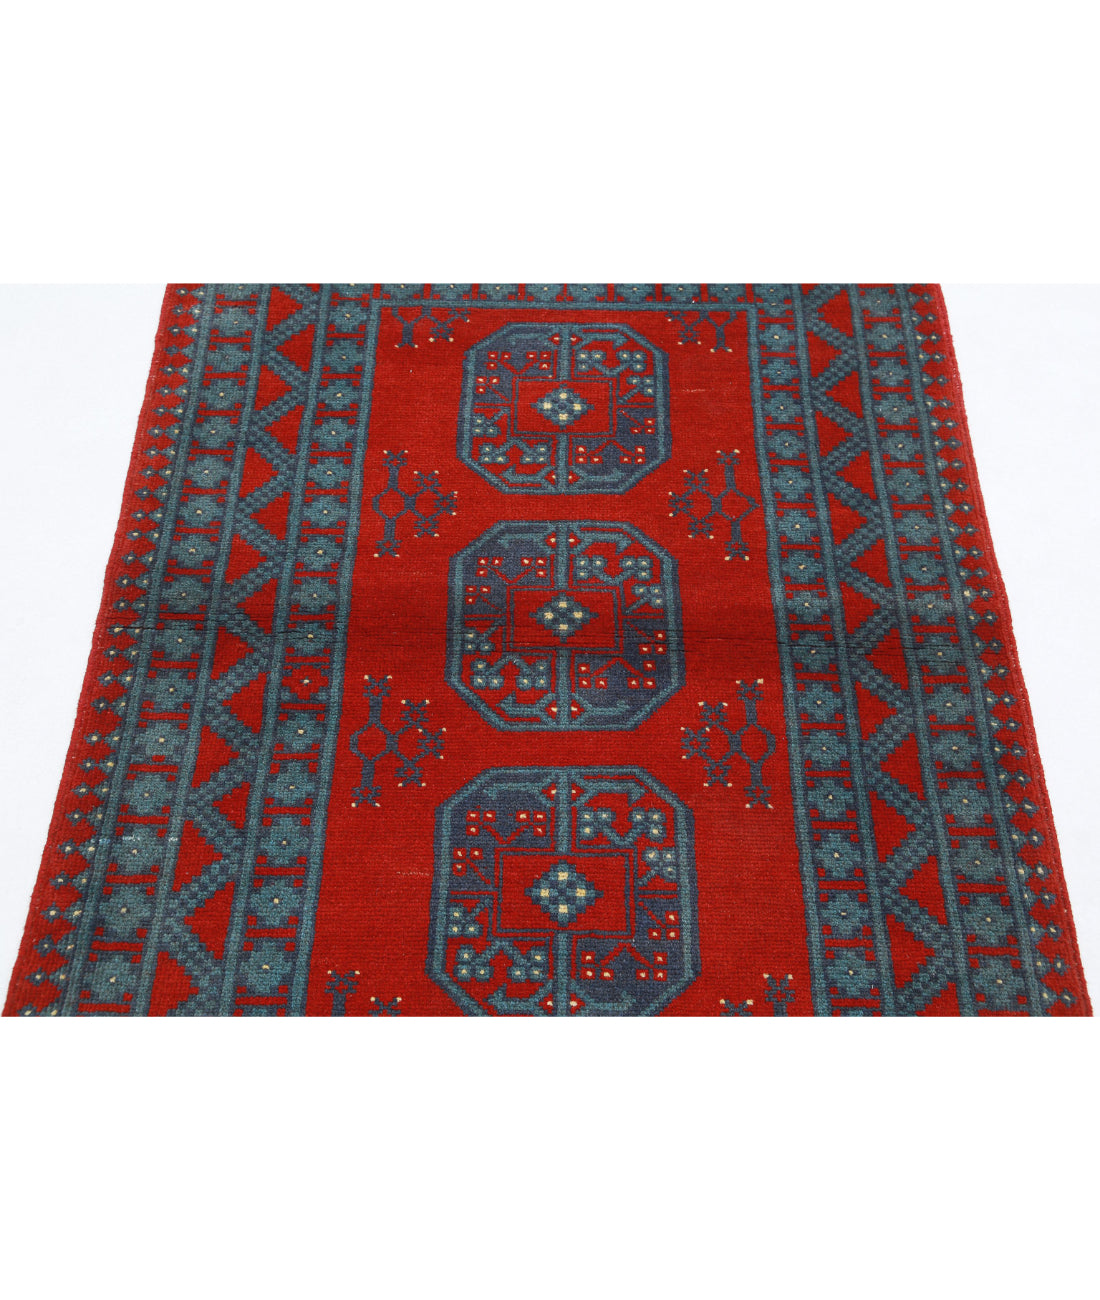 Revival 3'6'' X 4'9'' Hand-Knotted Wool Rug 3'6'' x 4'9'' (105 X 143) / Red / Green